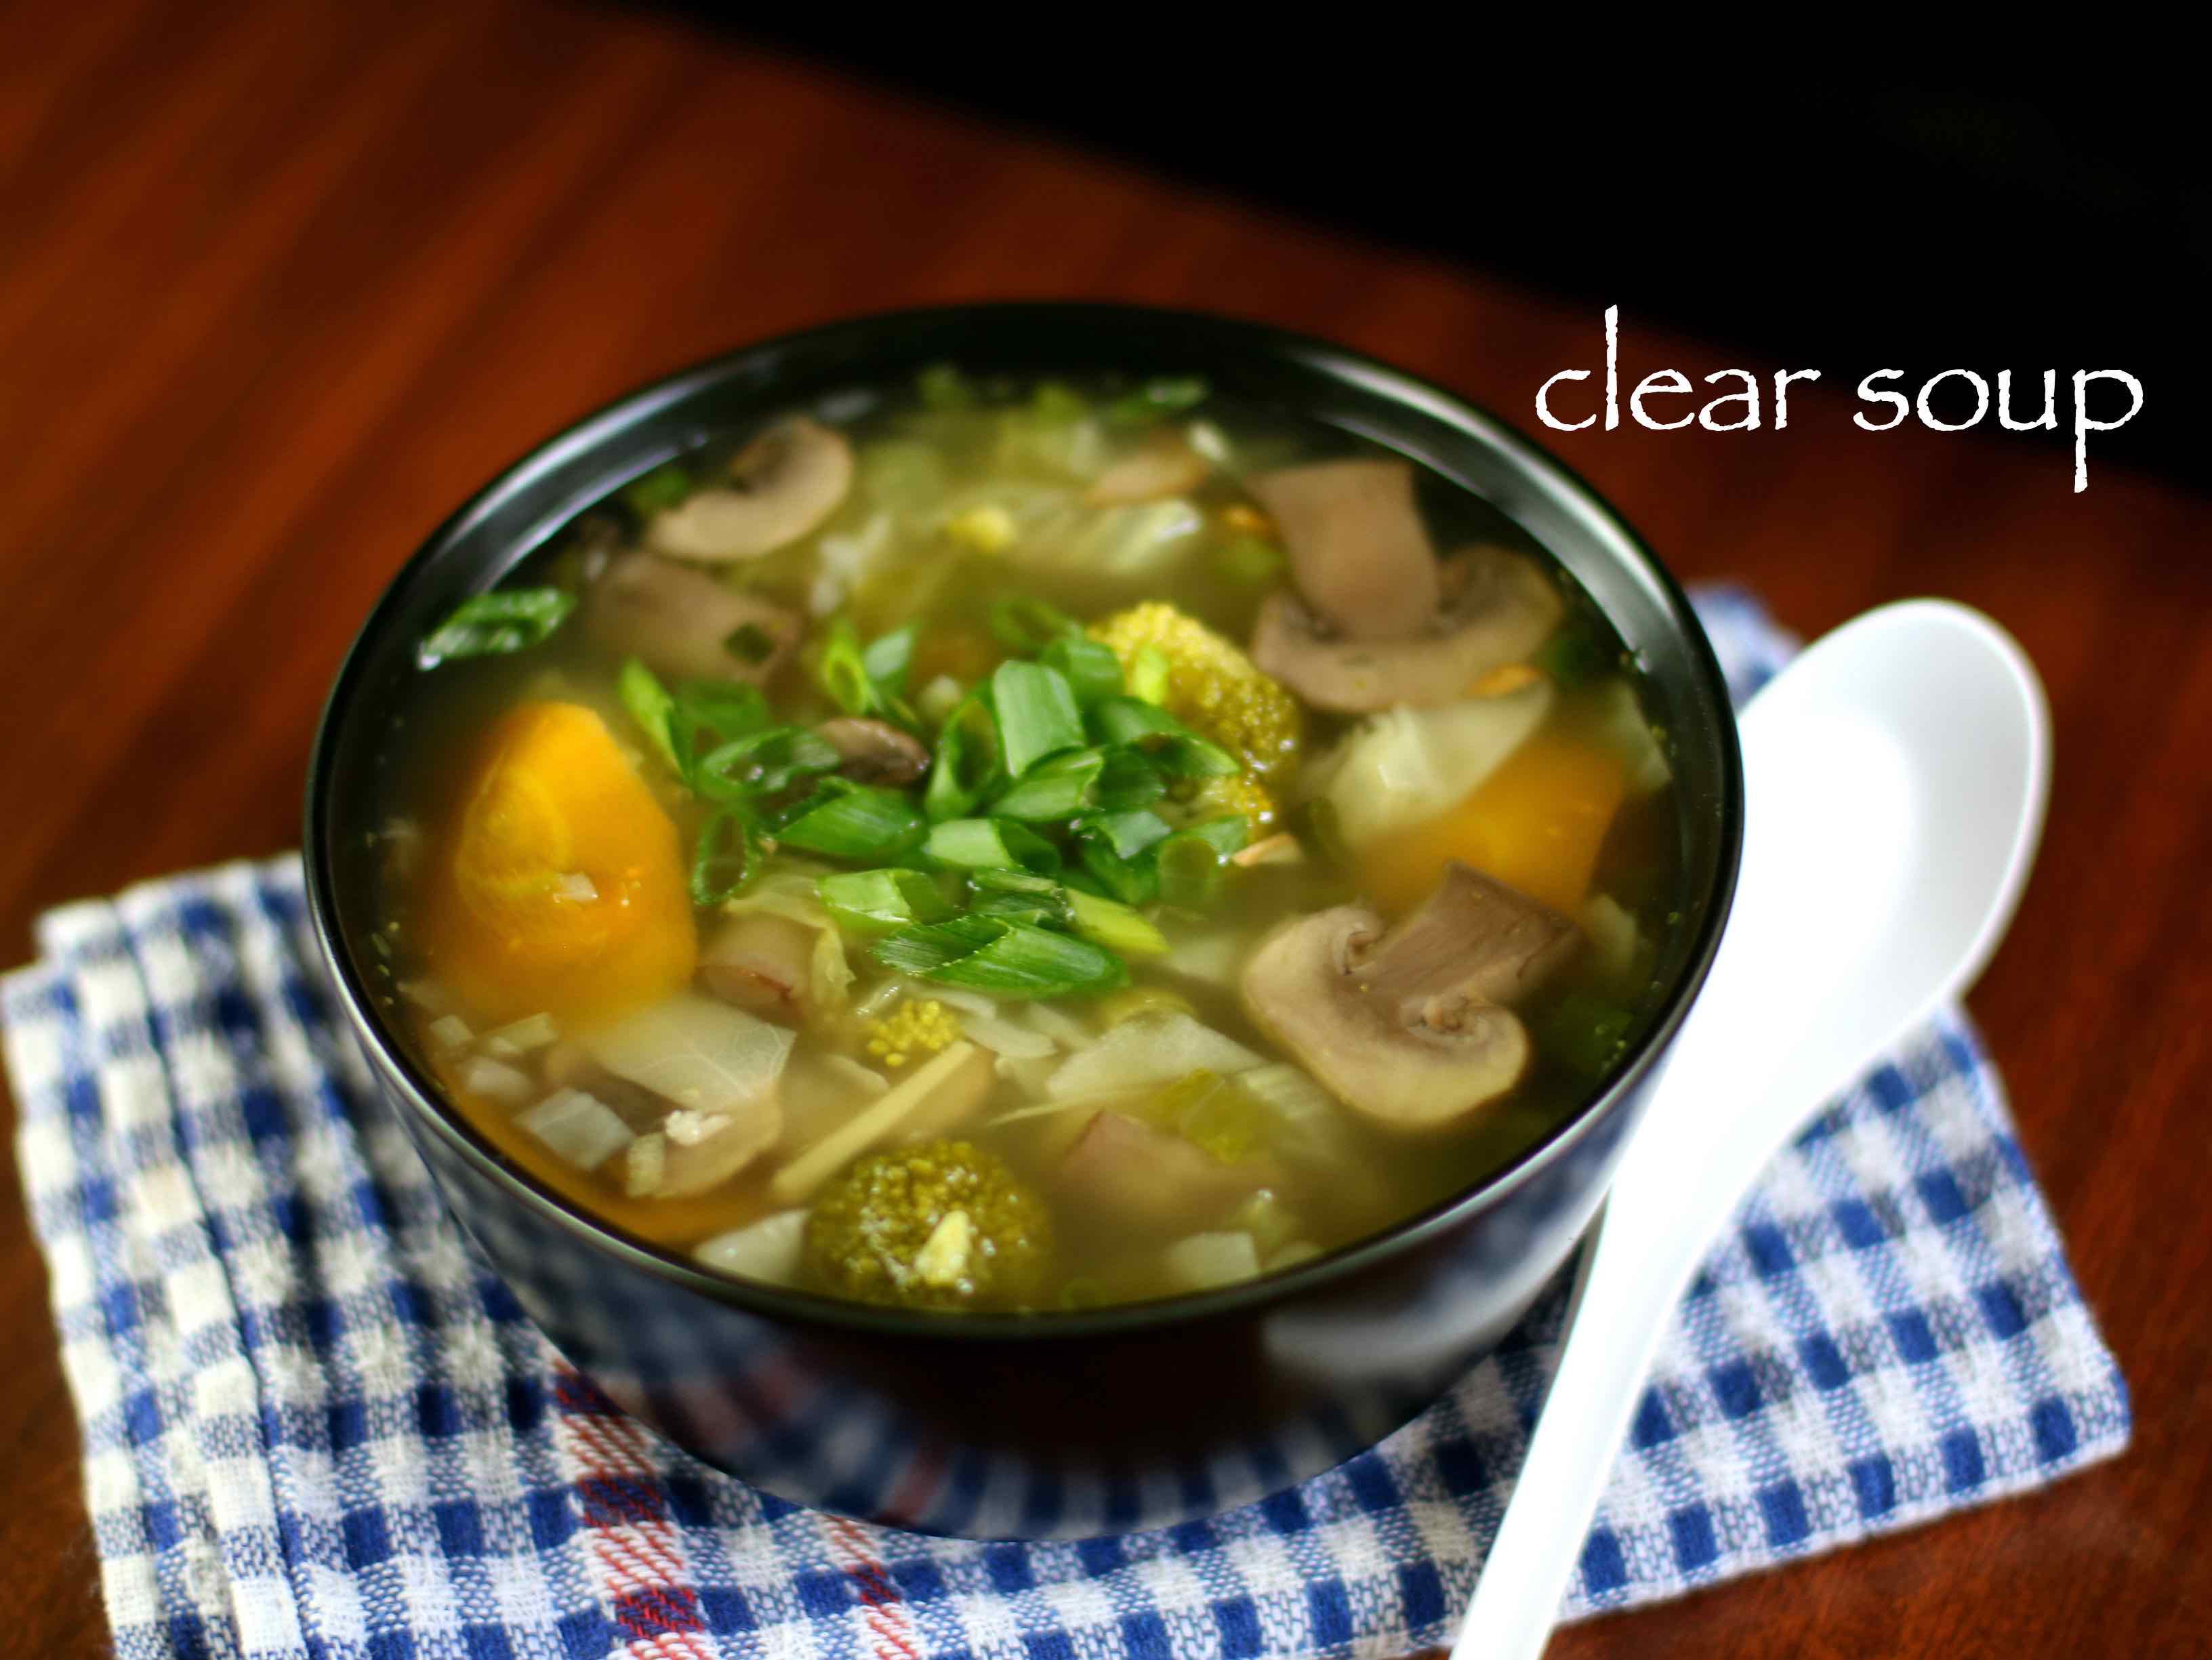 Easiest Way to Make Chinese Vegetarian Soup Recipes